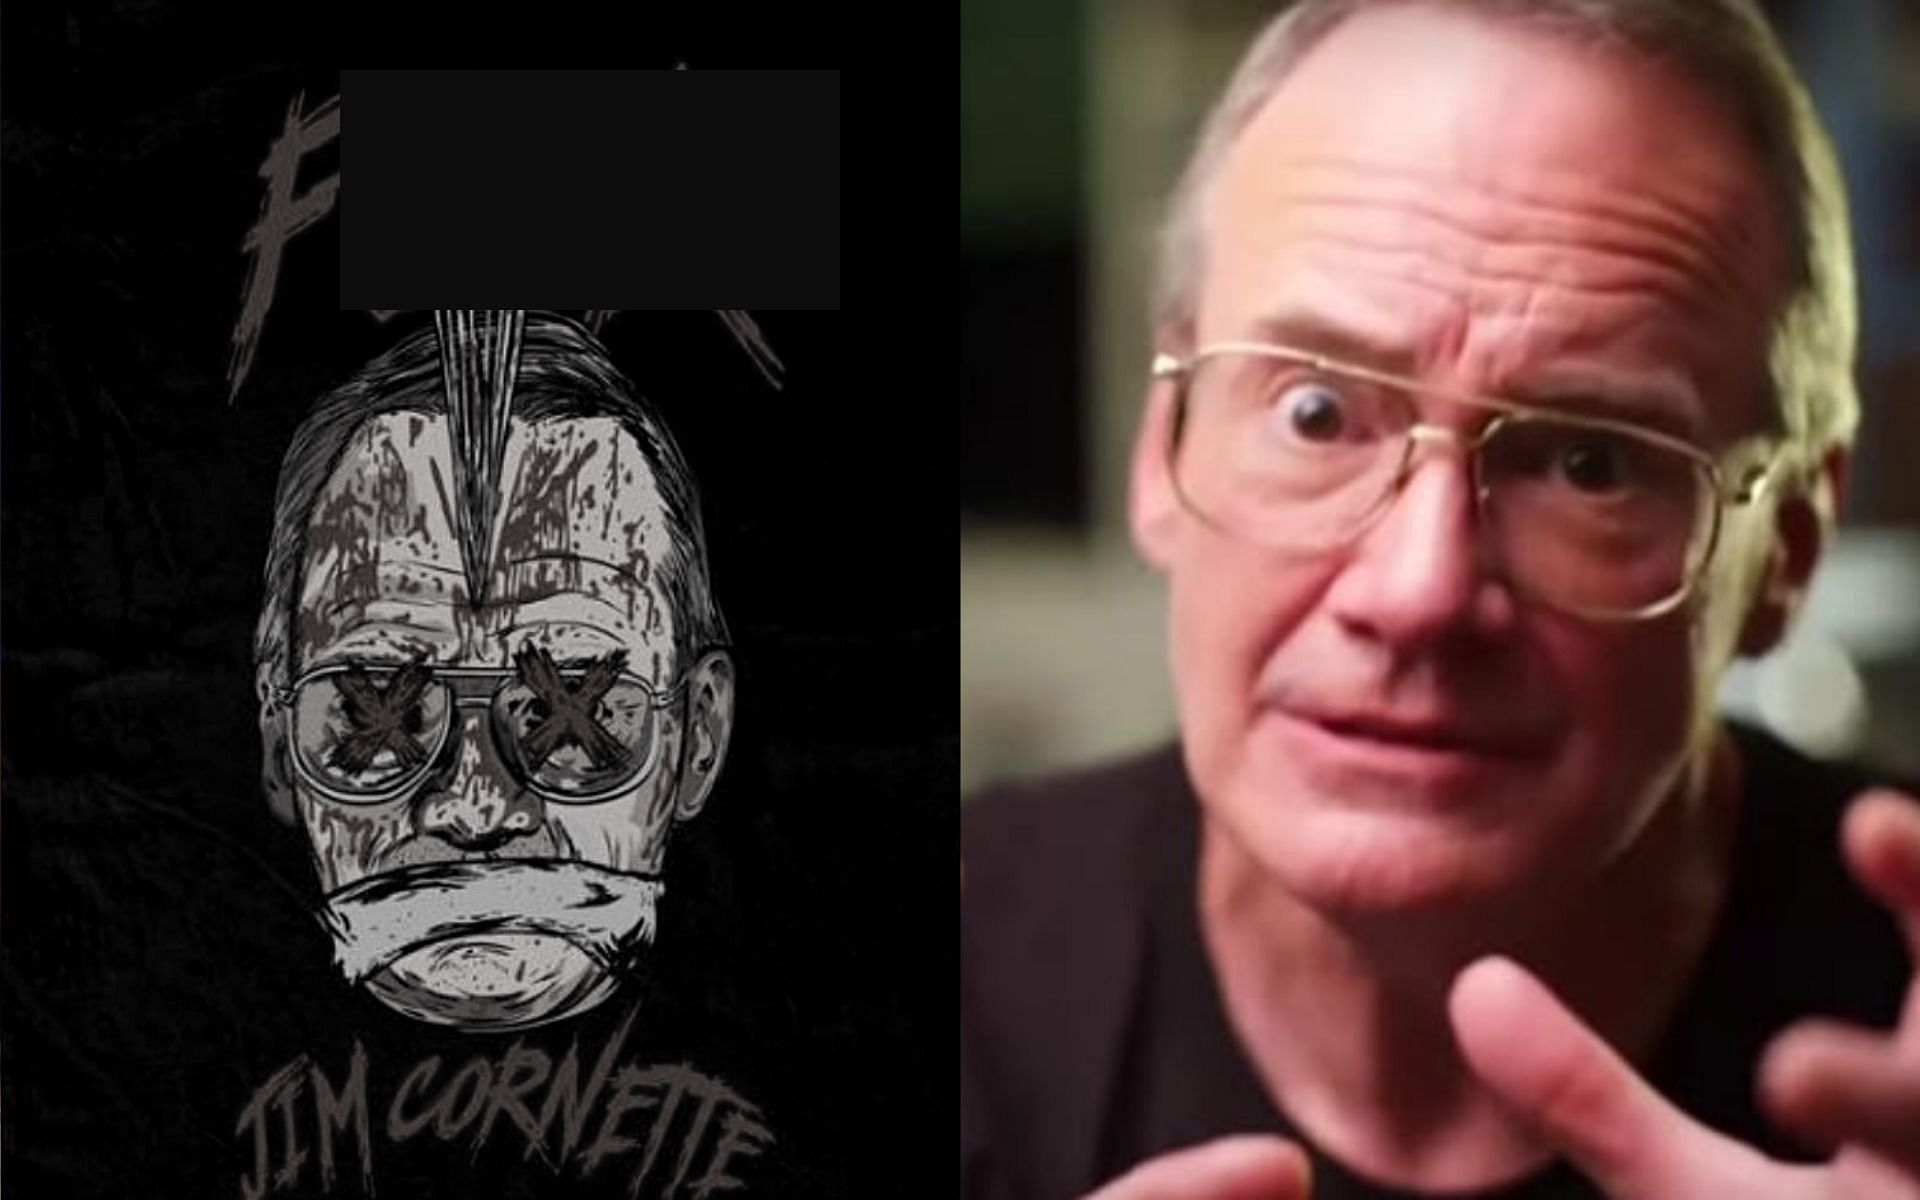 Jim Cornette had several issues with the wrestler at one point in time